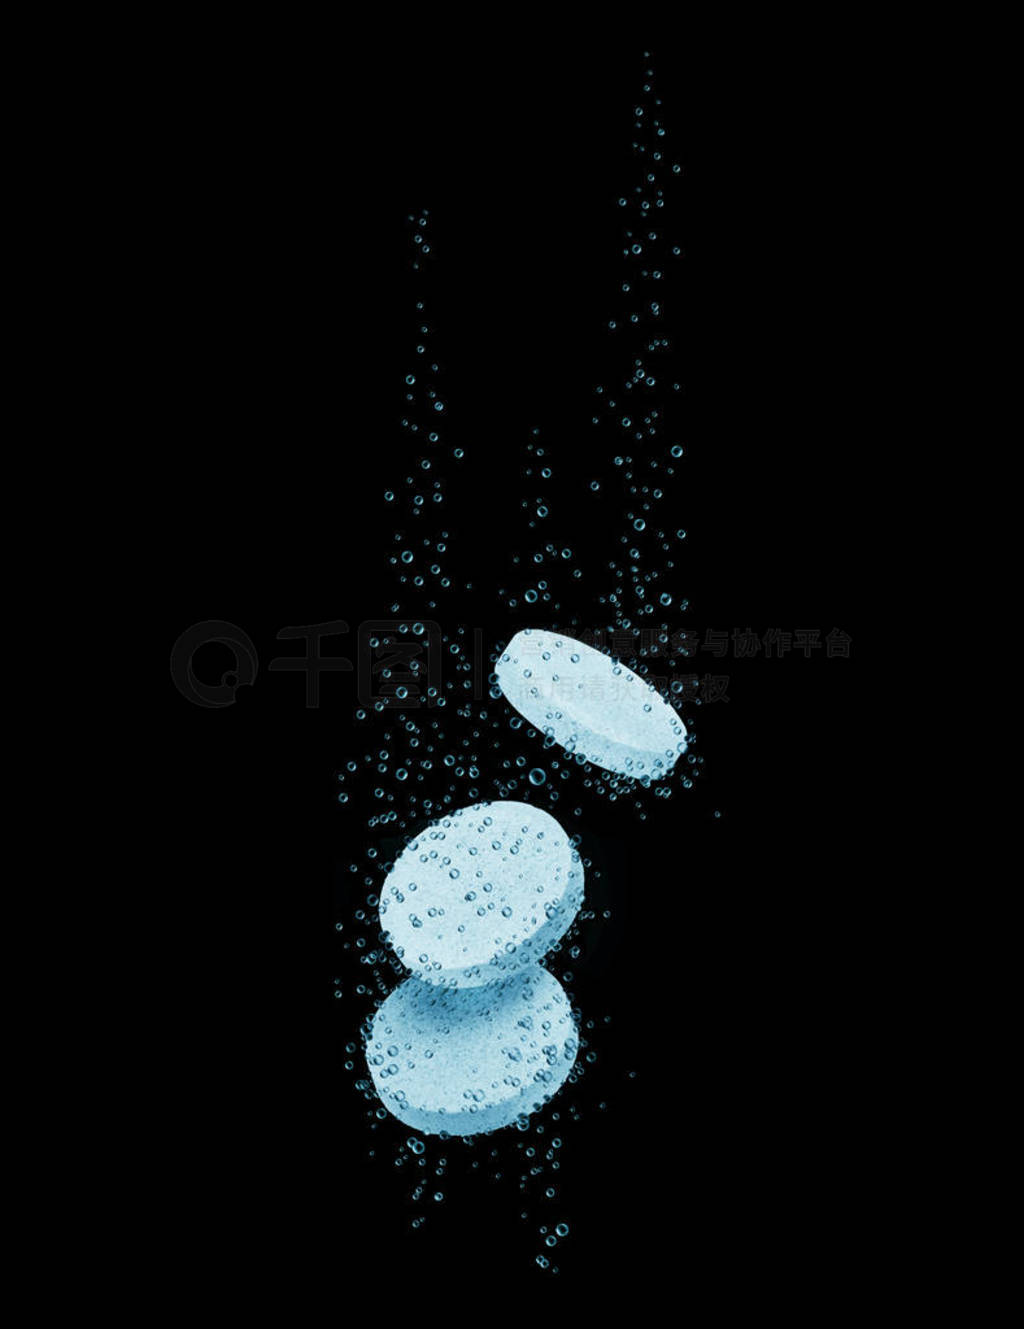 Three medical pills dissolves in water on a black background